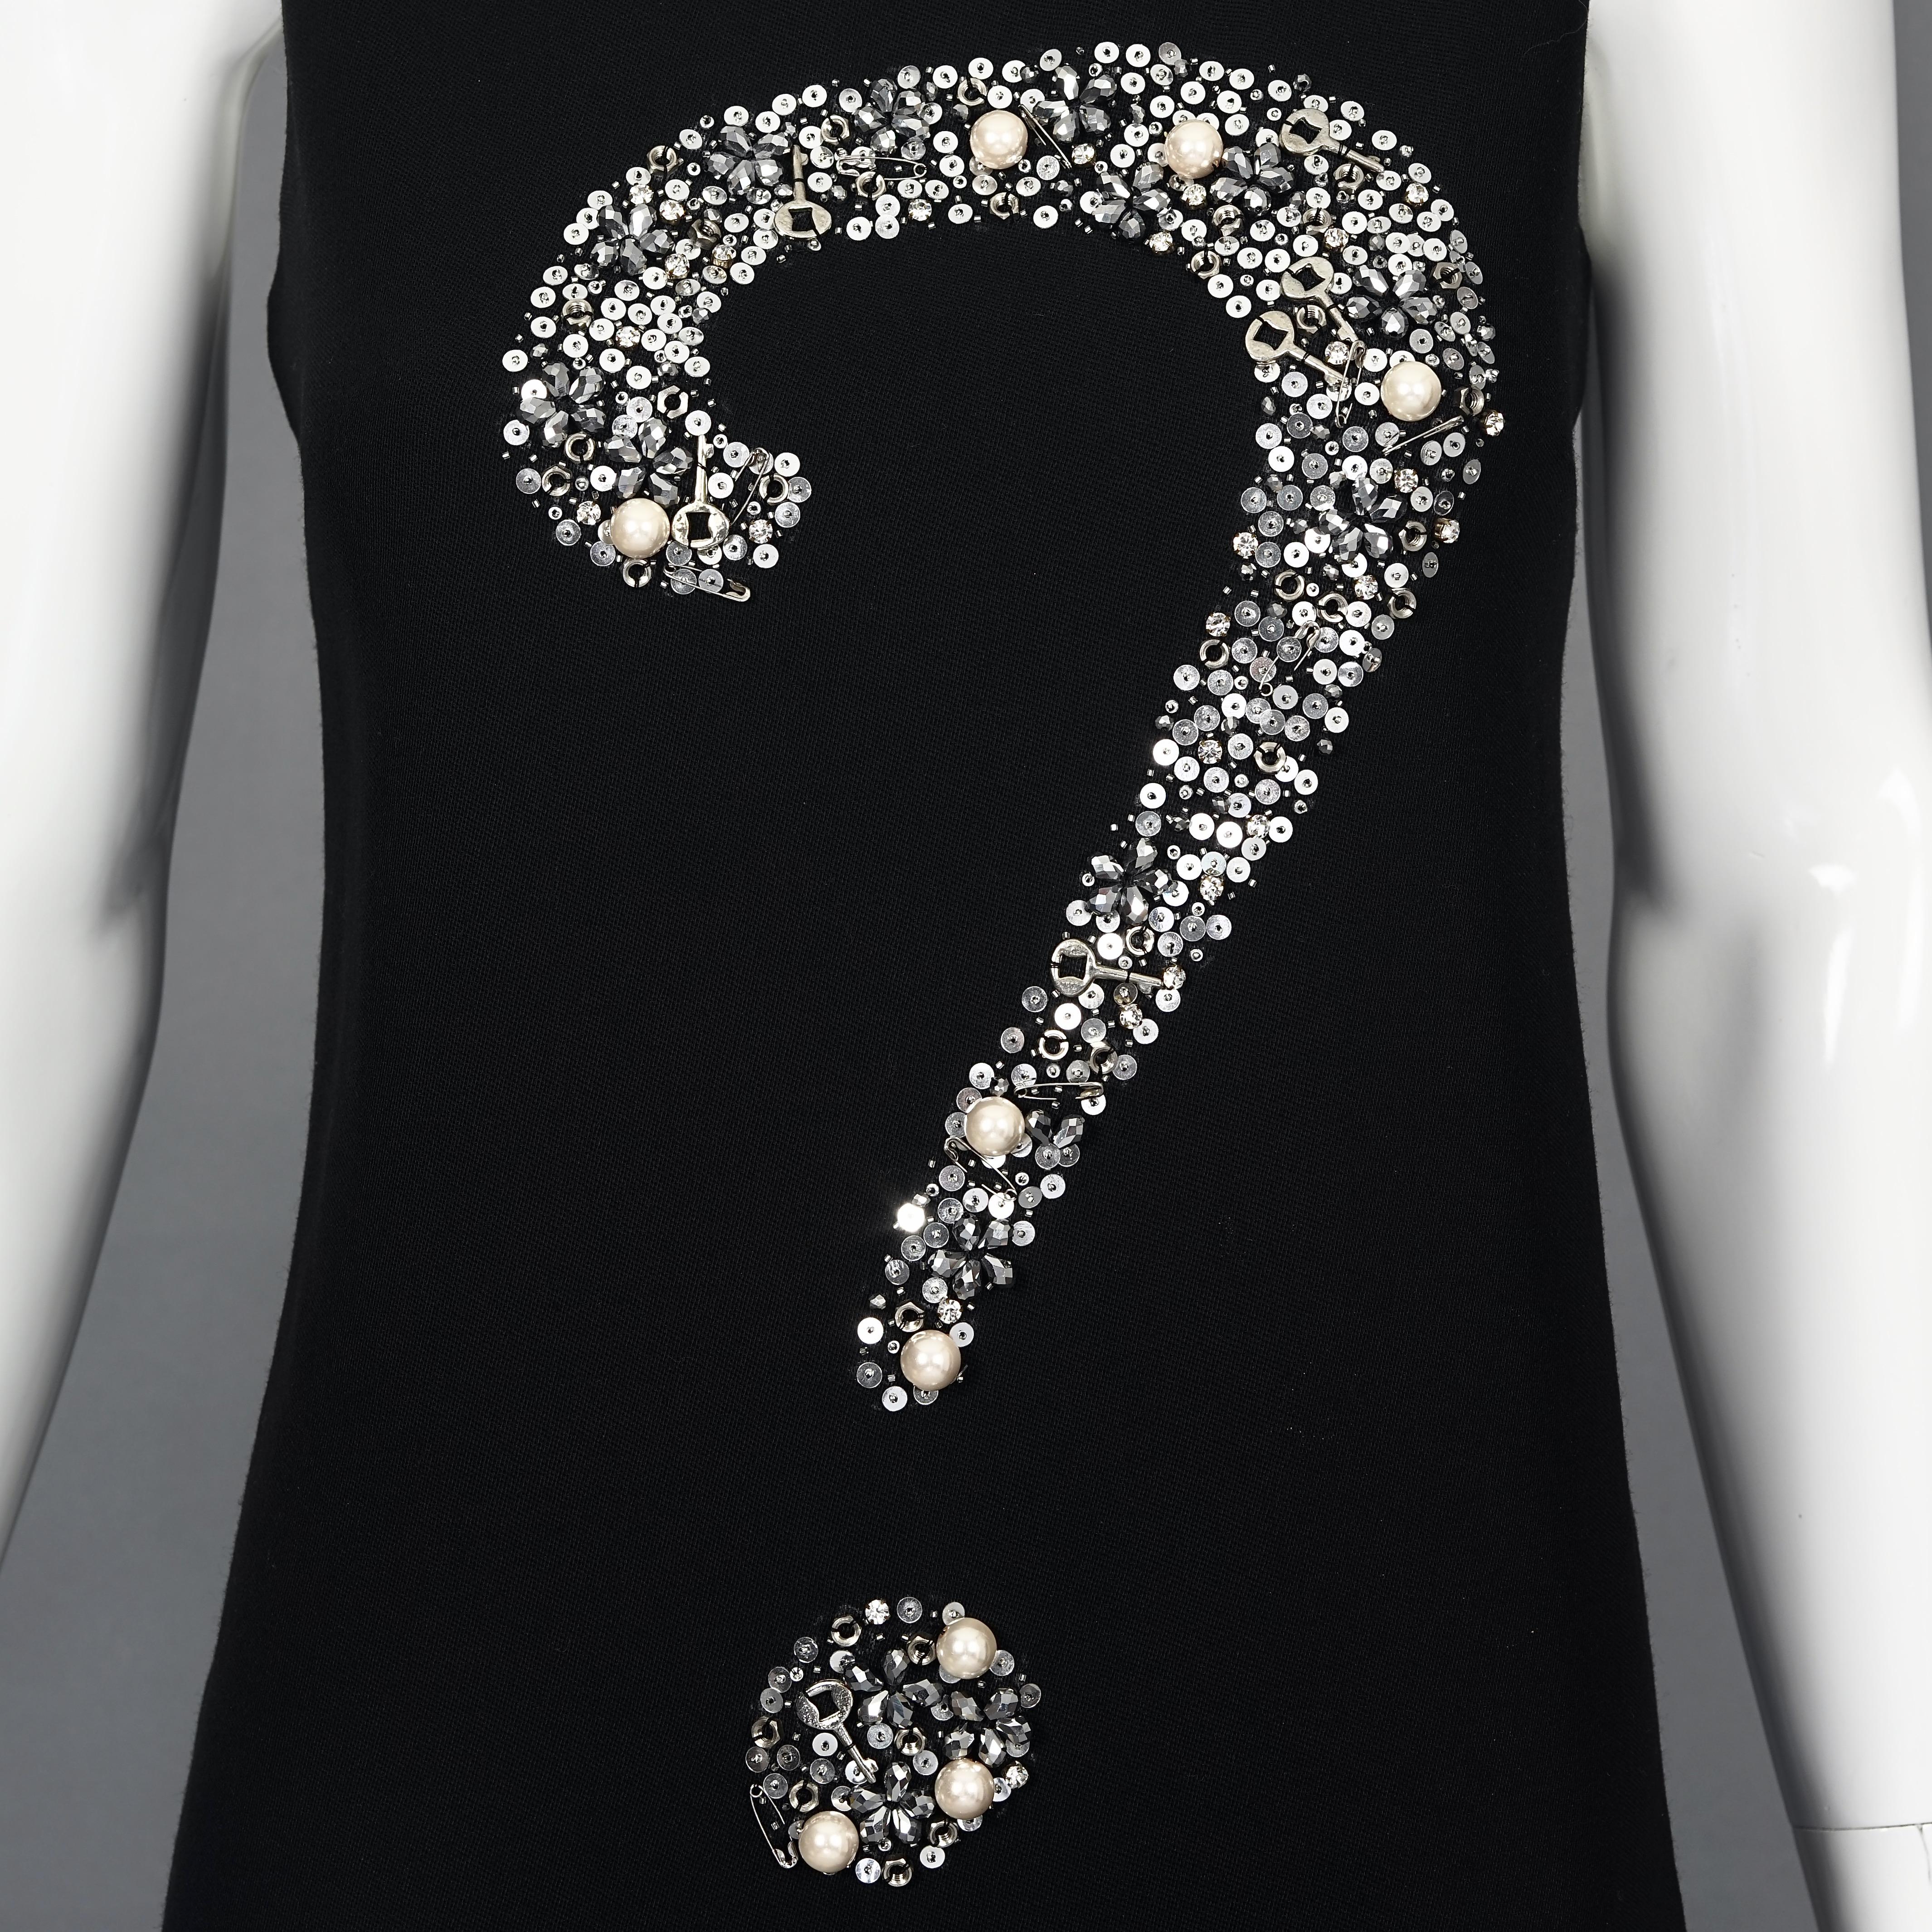 Iconic MOSCHINO Question Mark Embellished Dress In Excellent Condition In Kingersheim, Alsace